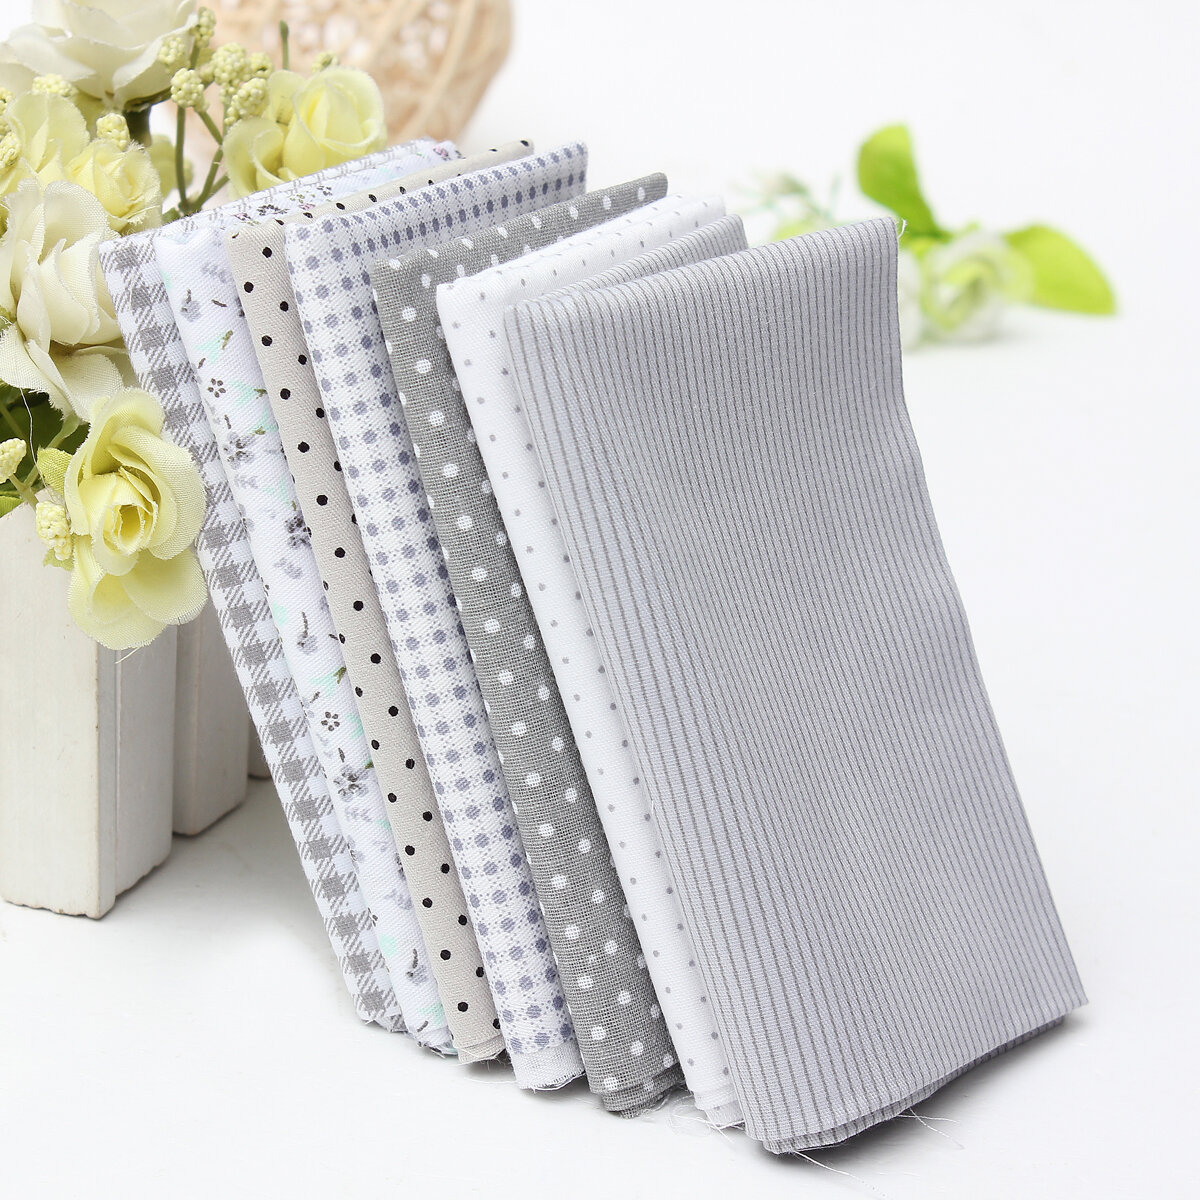 

7Pcs Square Fabric Bundle Cotton Patchwork Sewing Quilting Tissues Cloth DIY Fabric Crafts